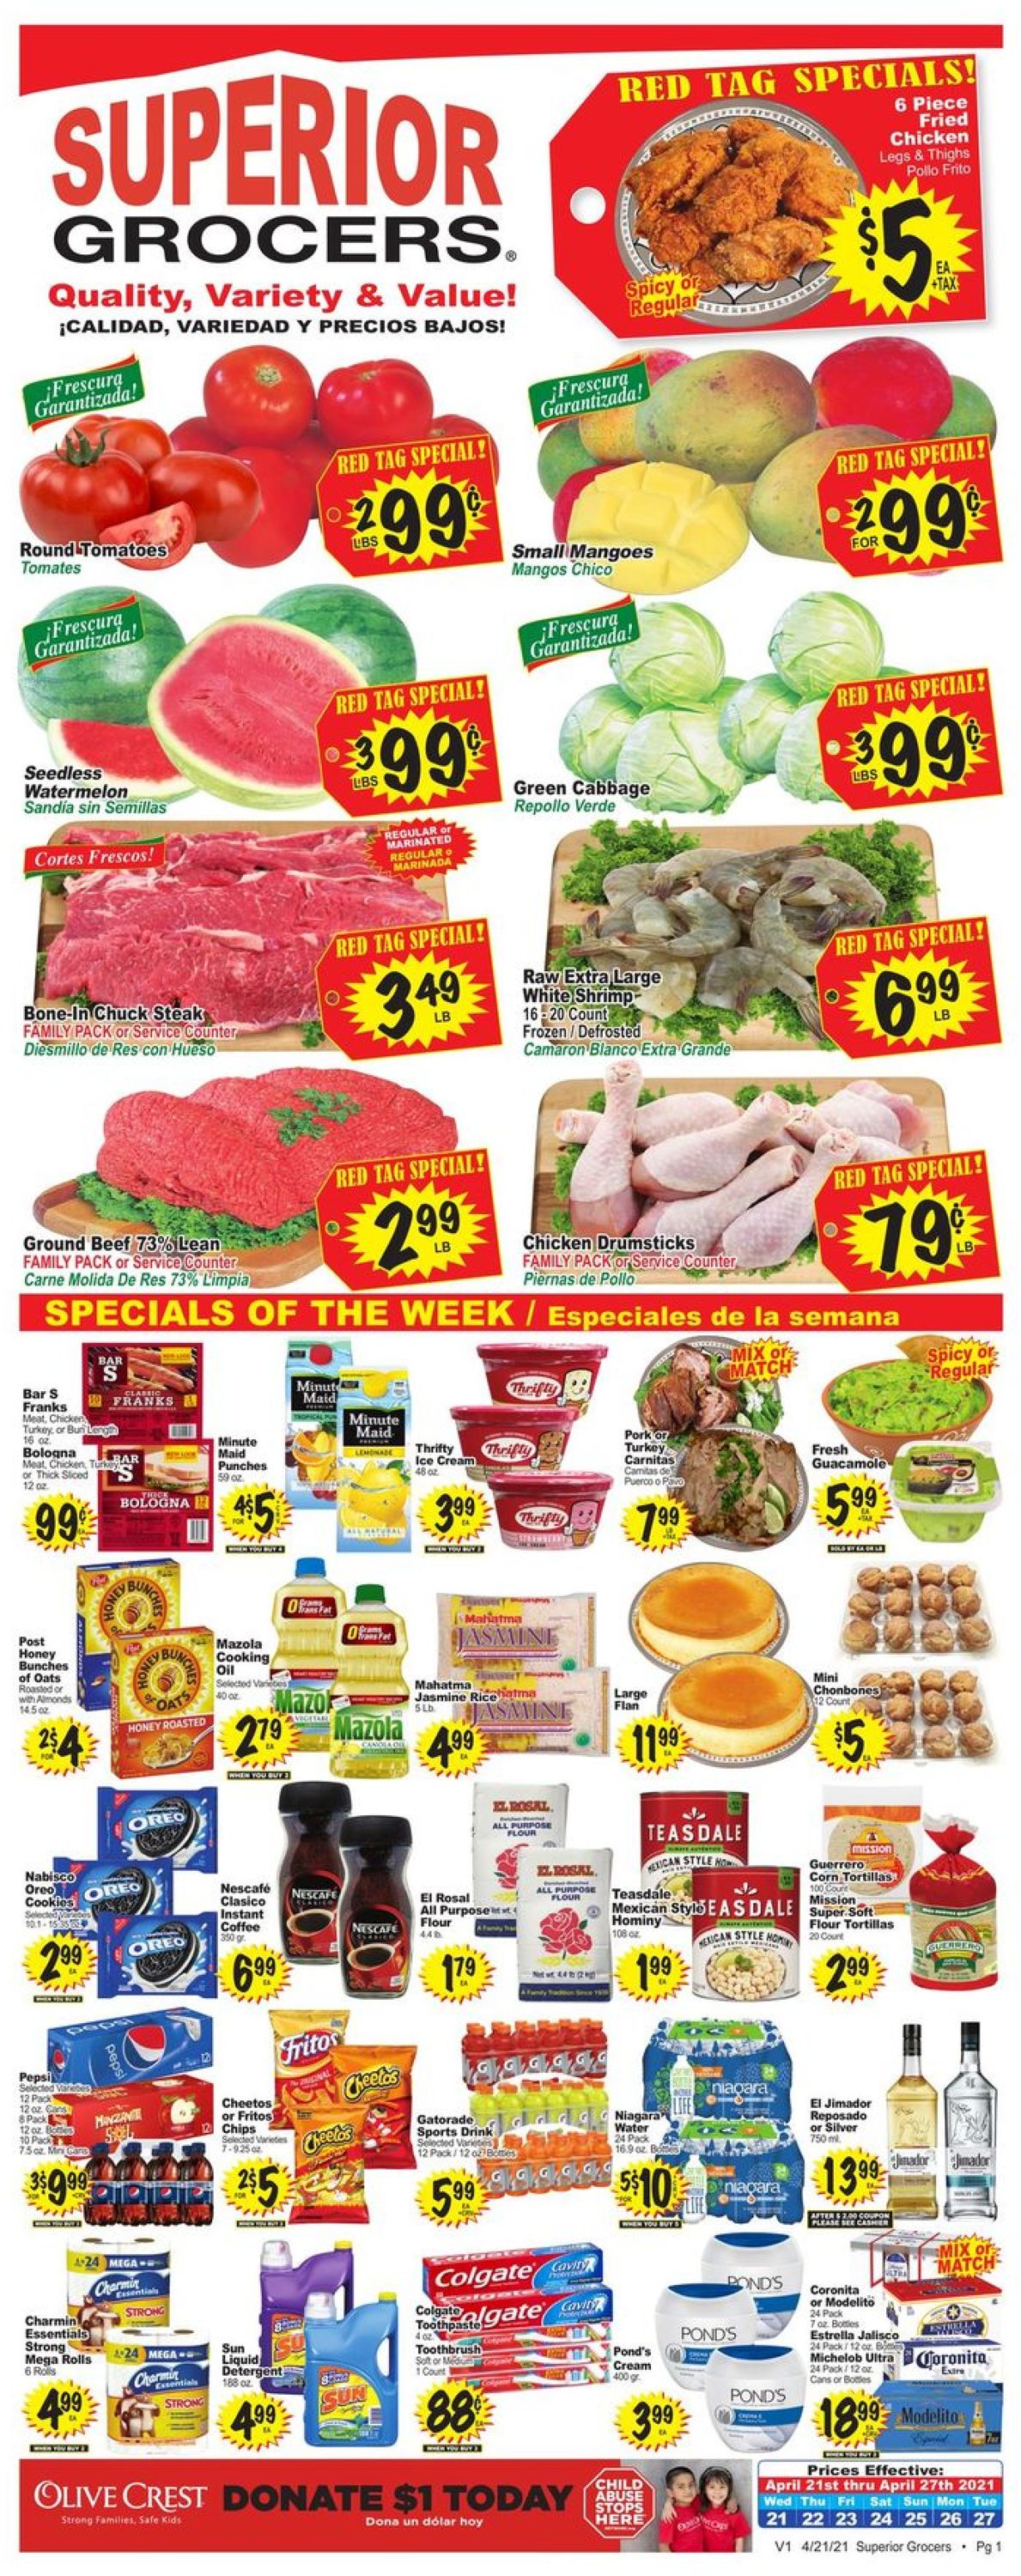 Superior Grocers Current weekly ad 04/21 - 04/27/2021 - frequent-ads.com